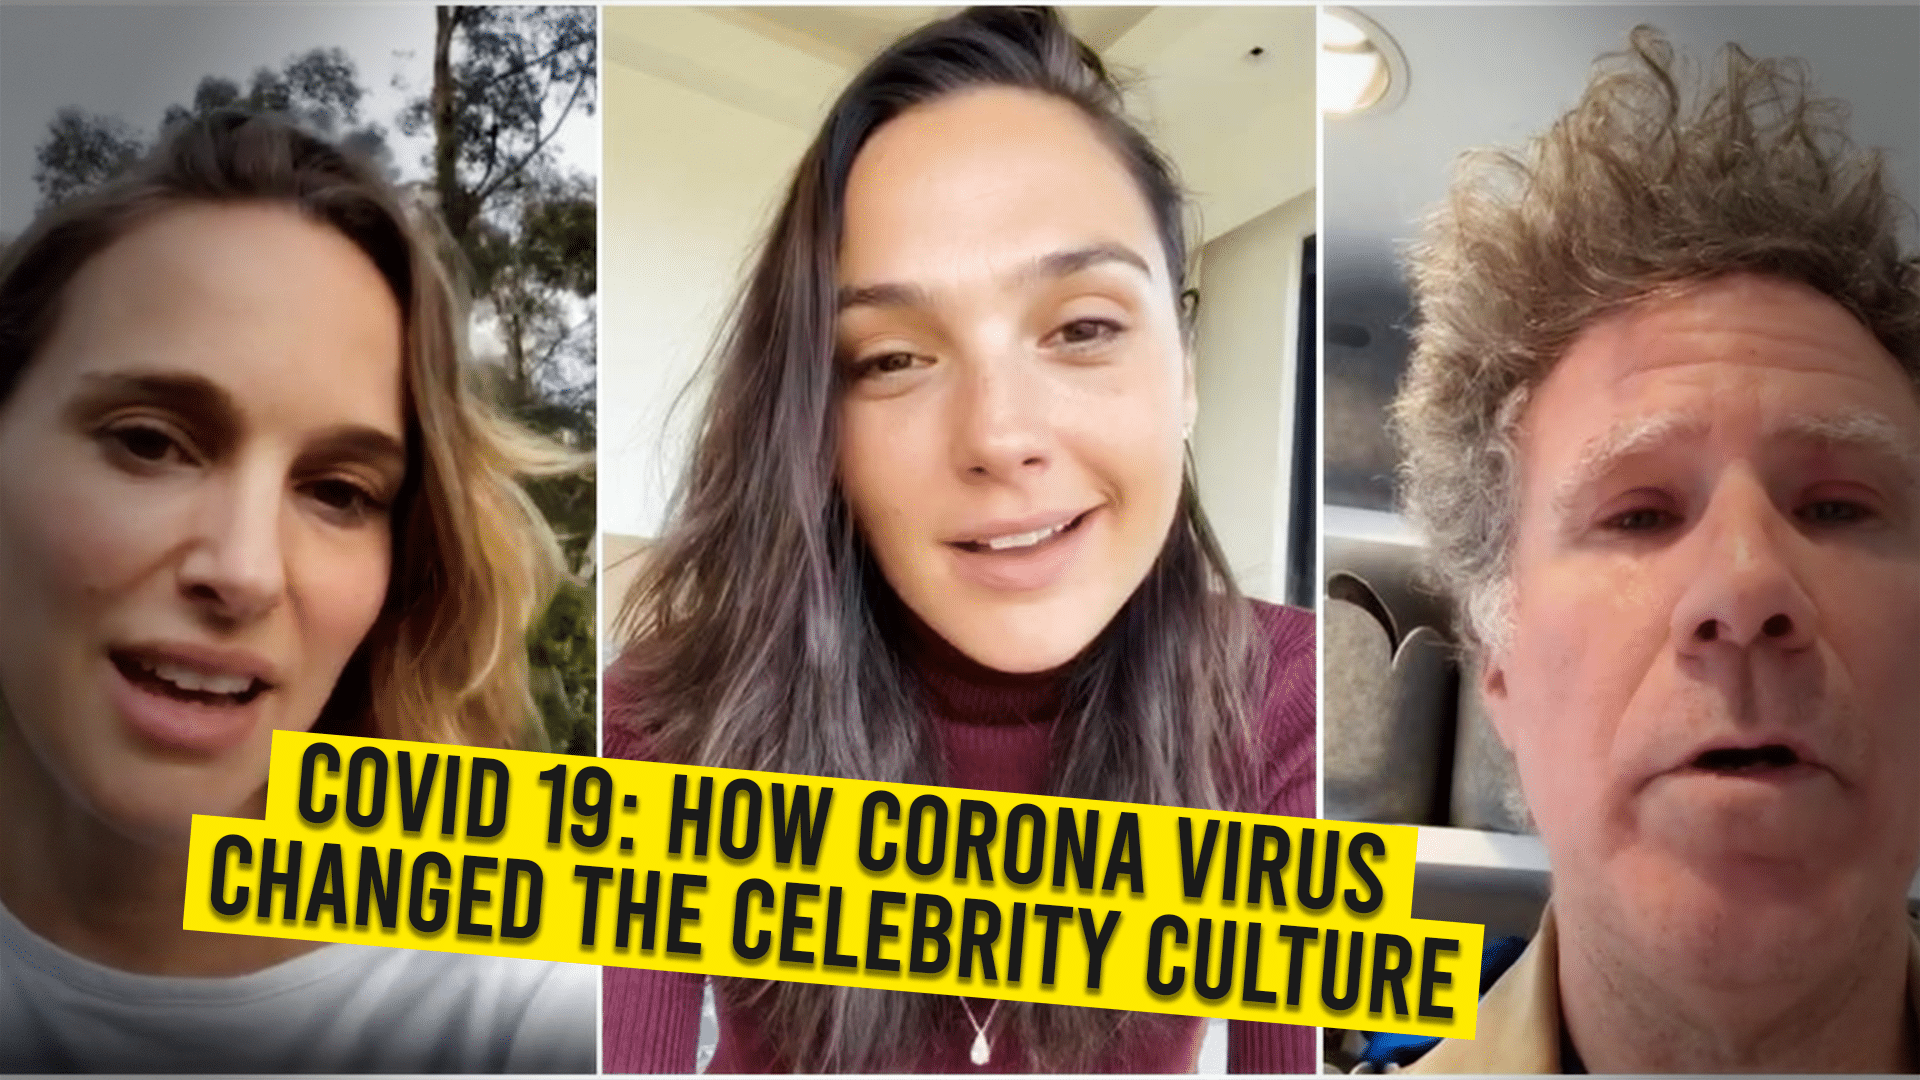 COVID 19: How Corona Virus Changed The Celebrity Culture